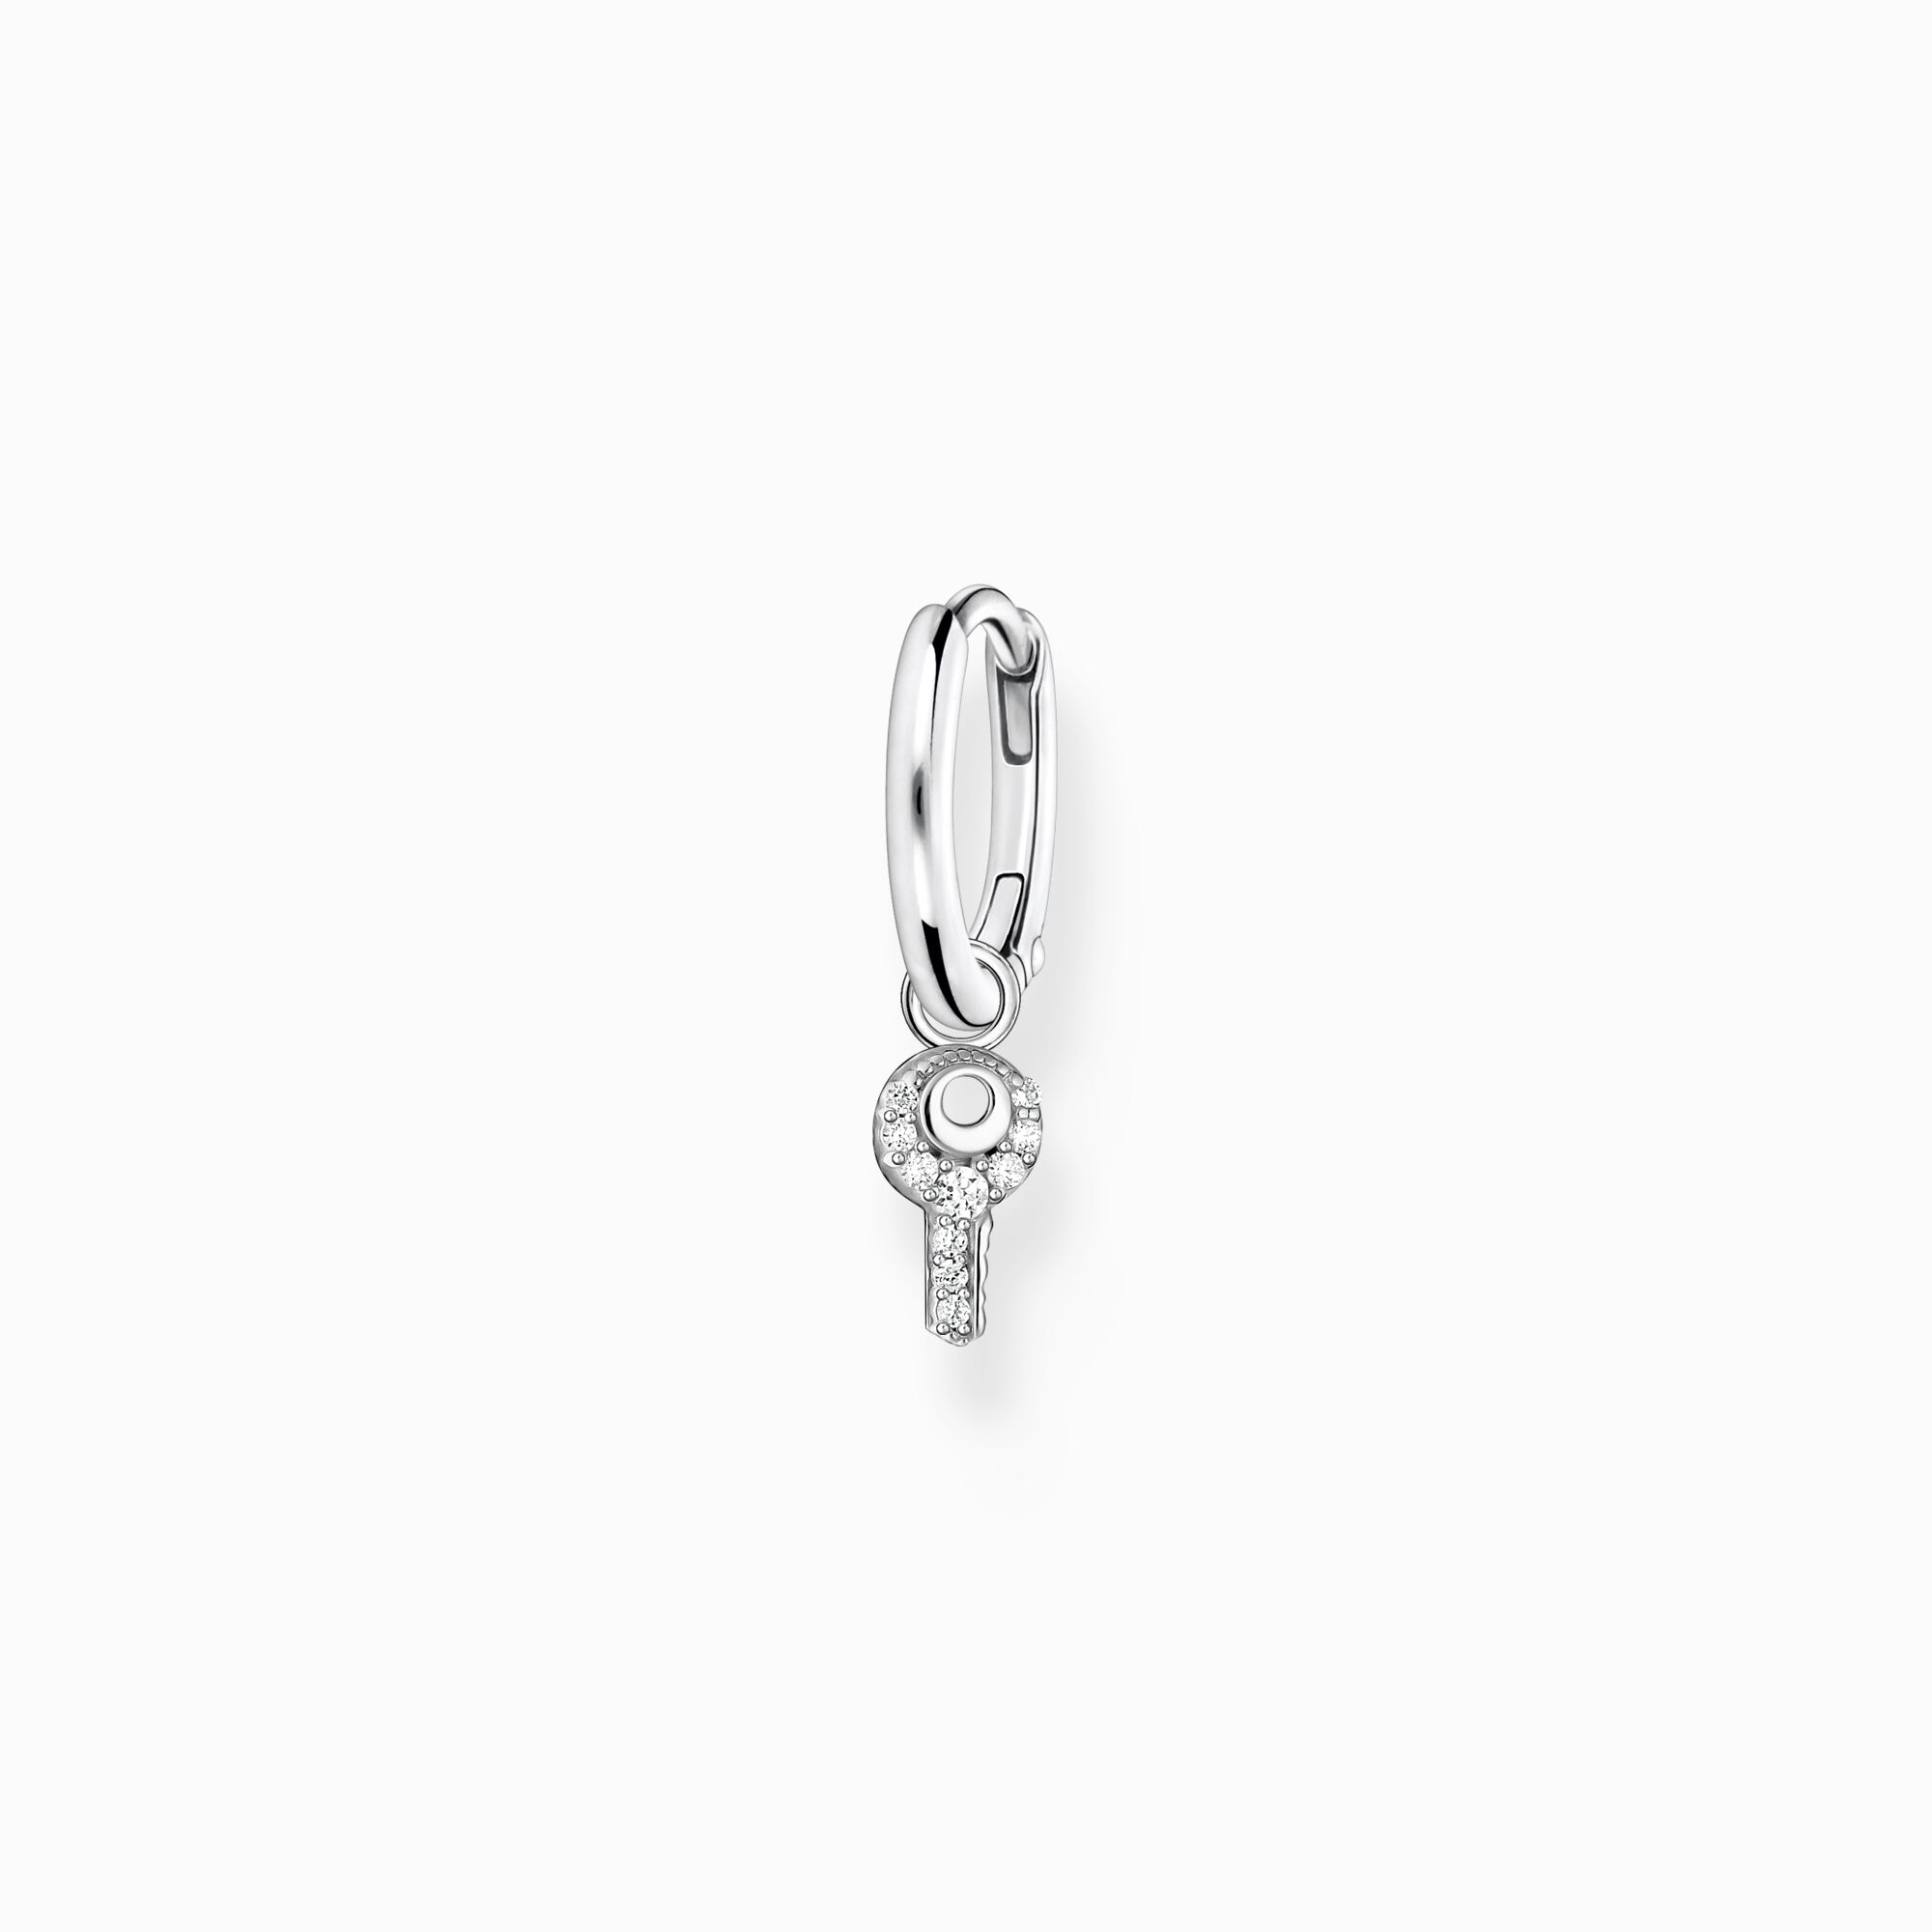 Single hoop earring with key pendant silver from the Charming Collection collection in the THOMAS SABO online store